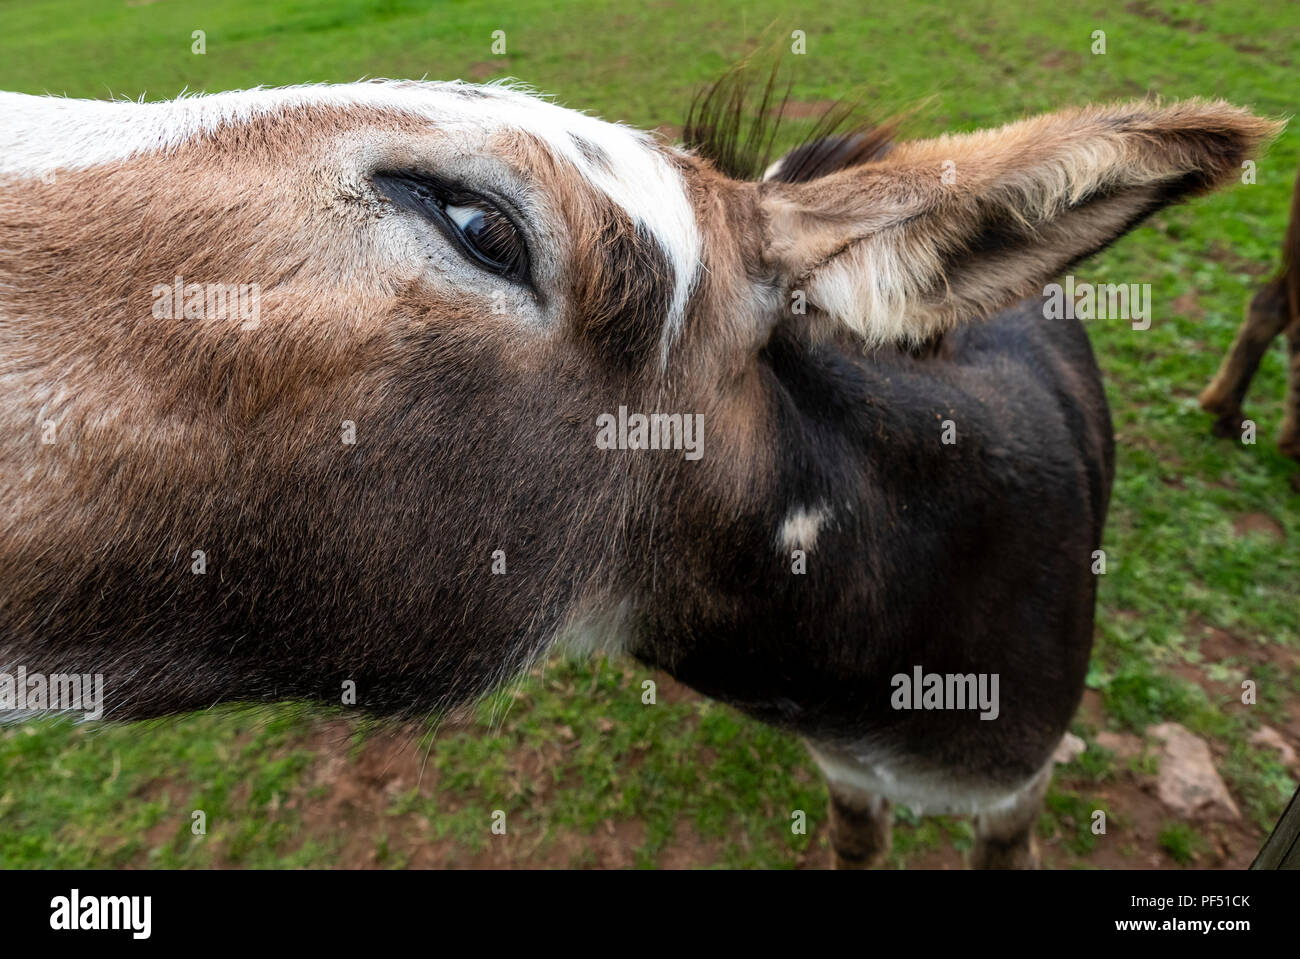 A farmyard donkey looking over a paddock fence, Monmouthshire UK. Stock Photo